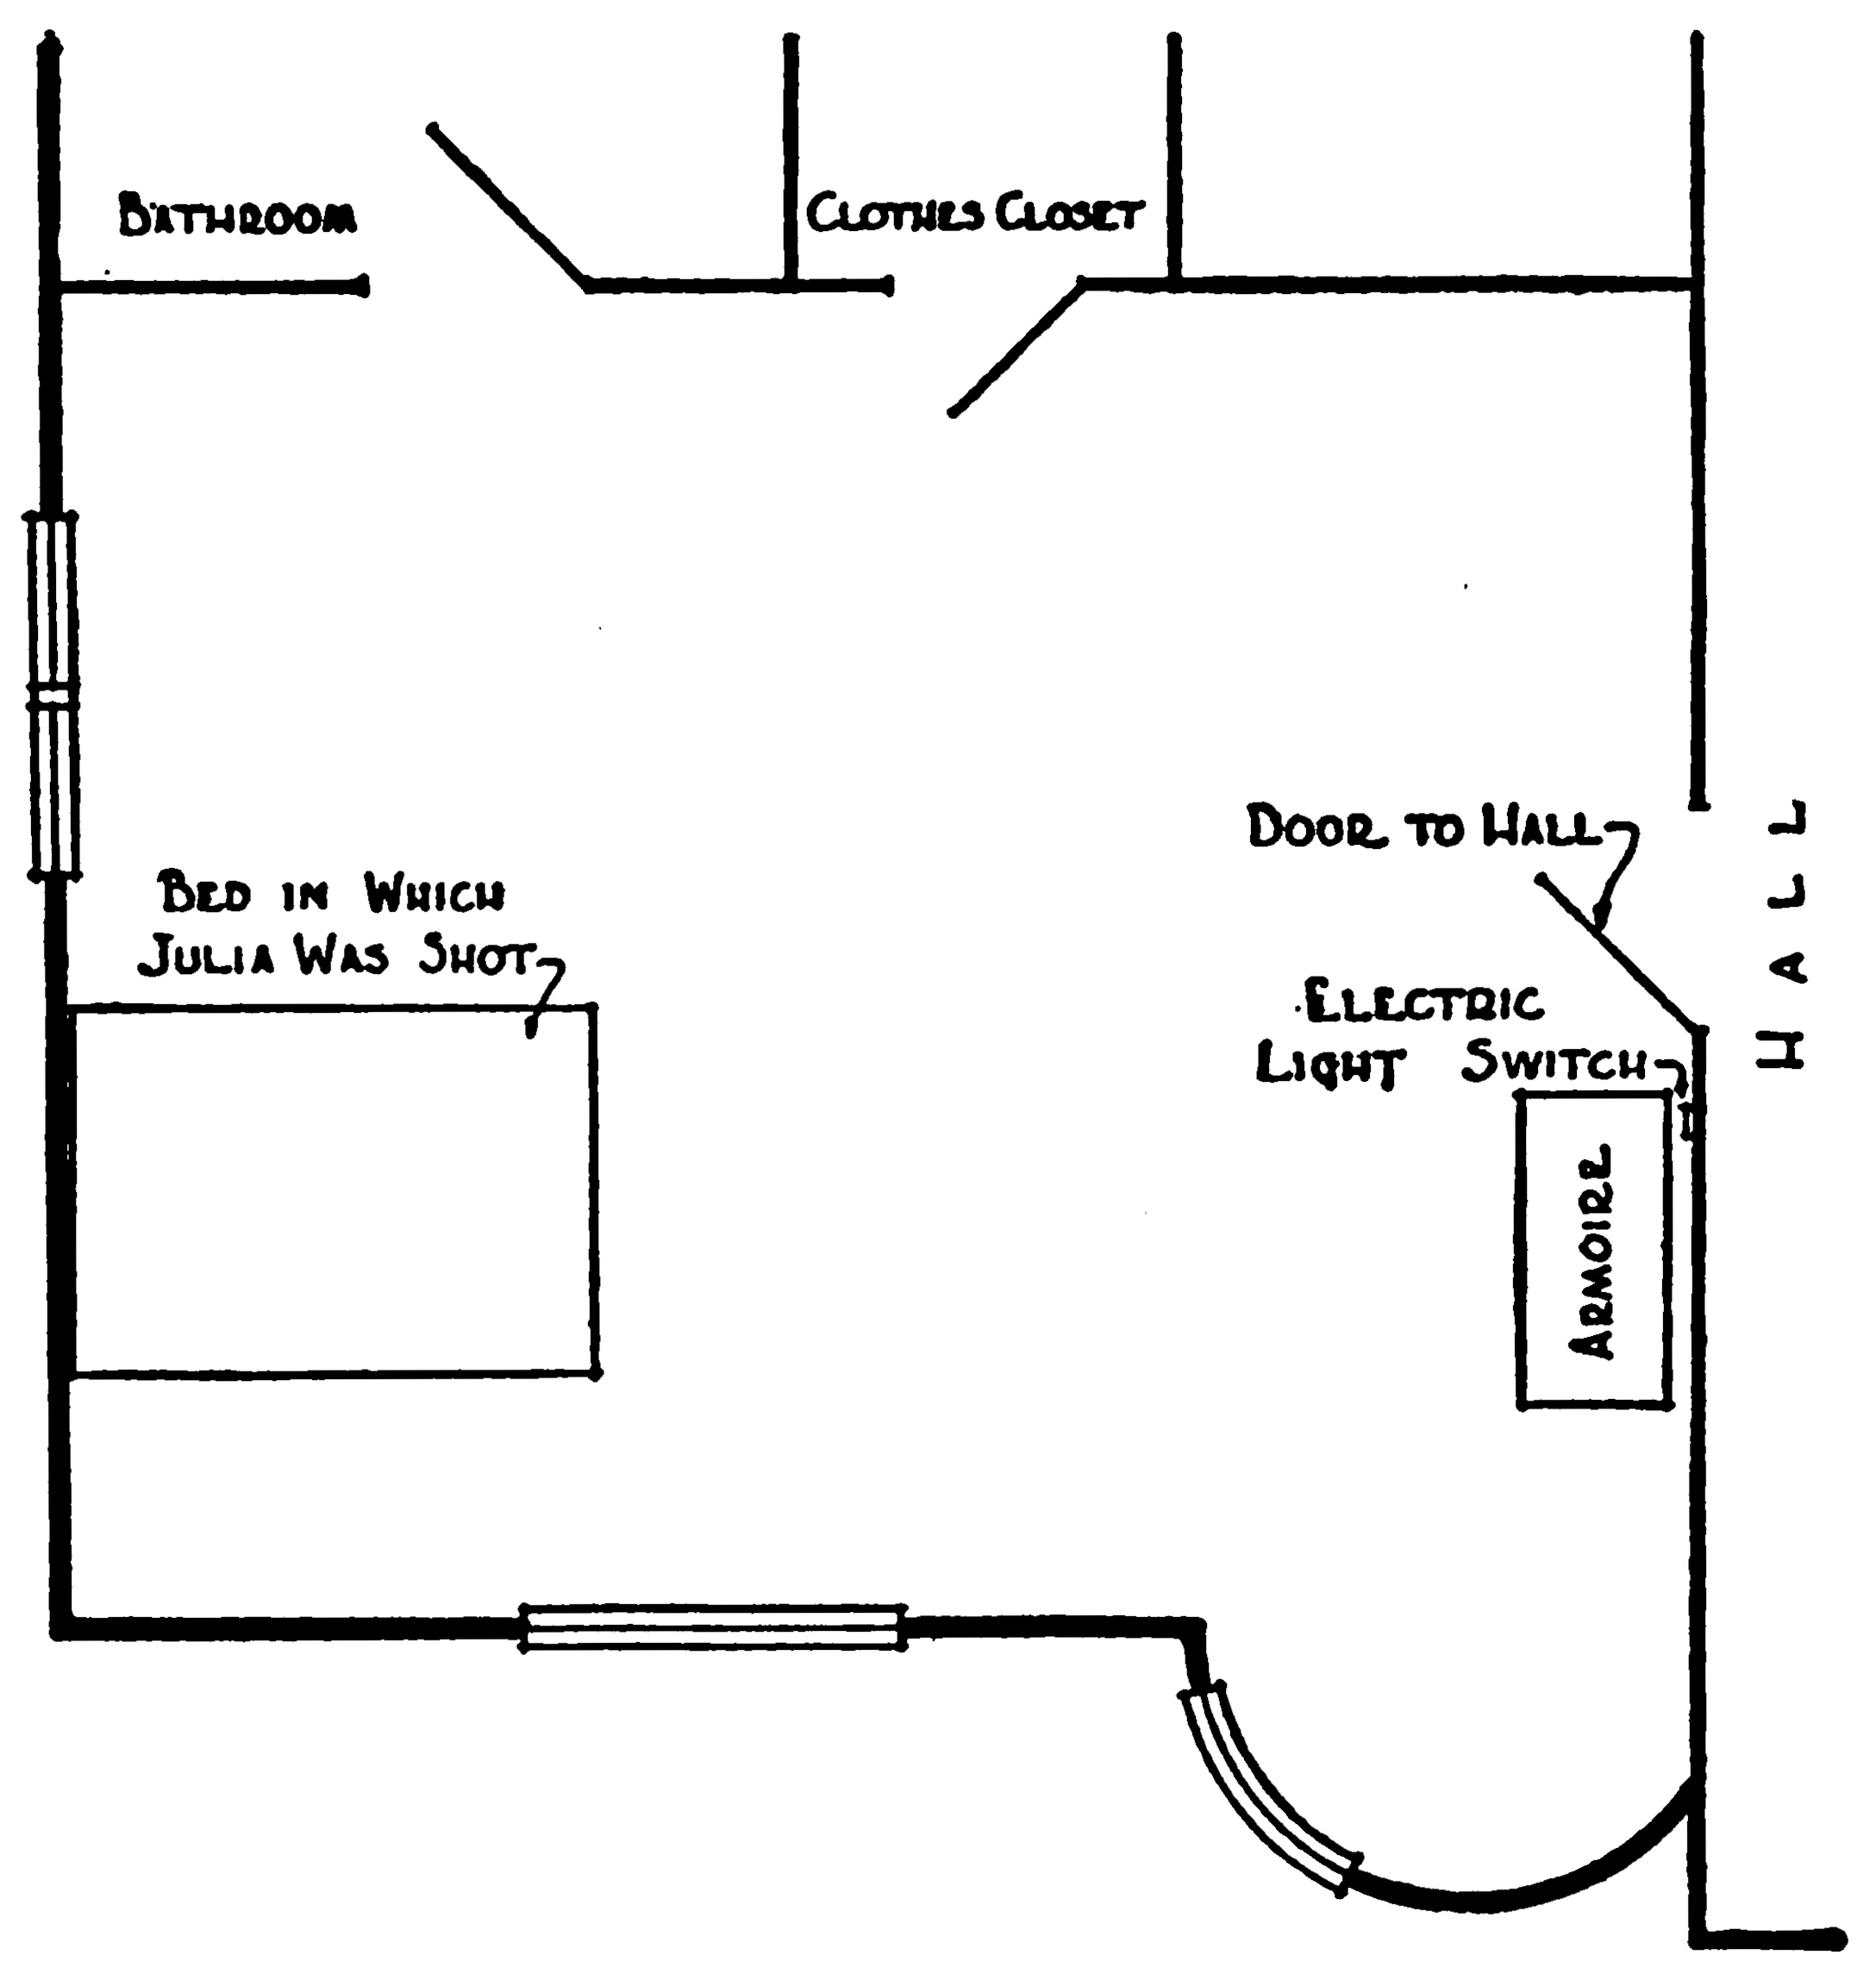 A plan of a bedroom. The bed faces     the door to the hall, and beside the door is an armoire standing     in front of the light switch. Two other doors lead to a bathroom     and a closet.